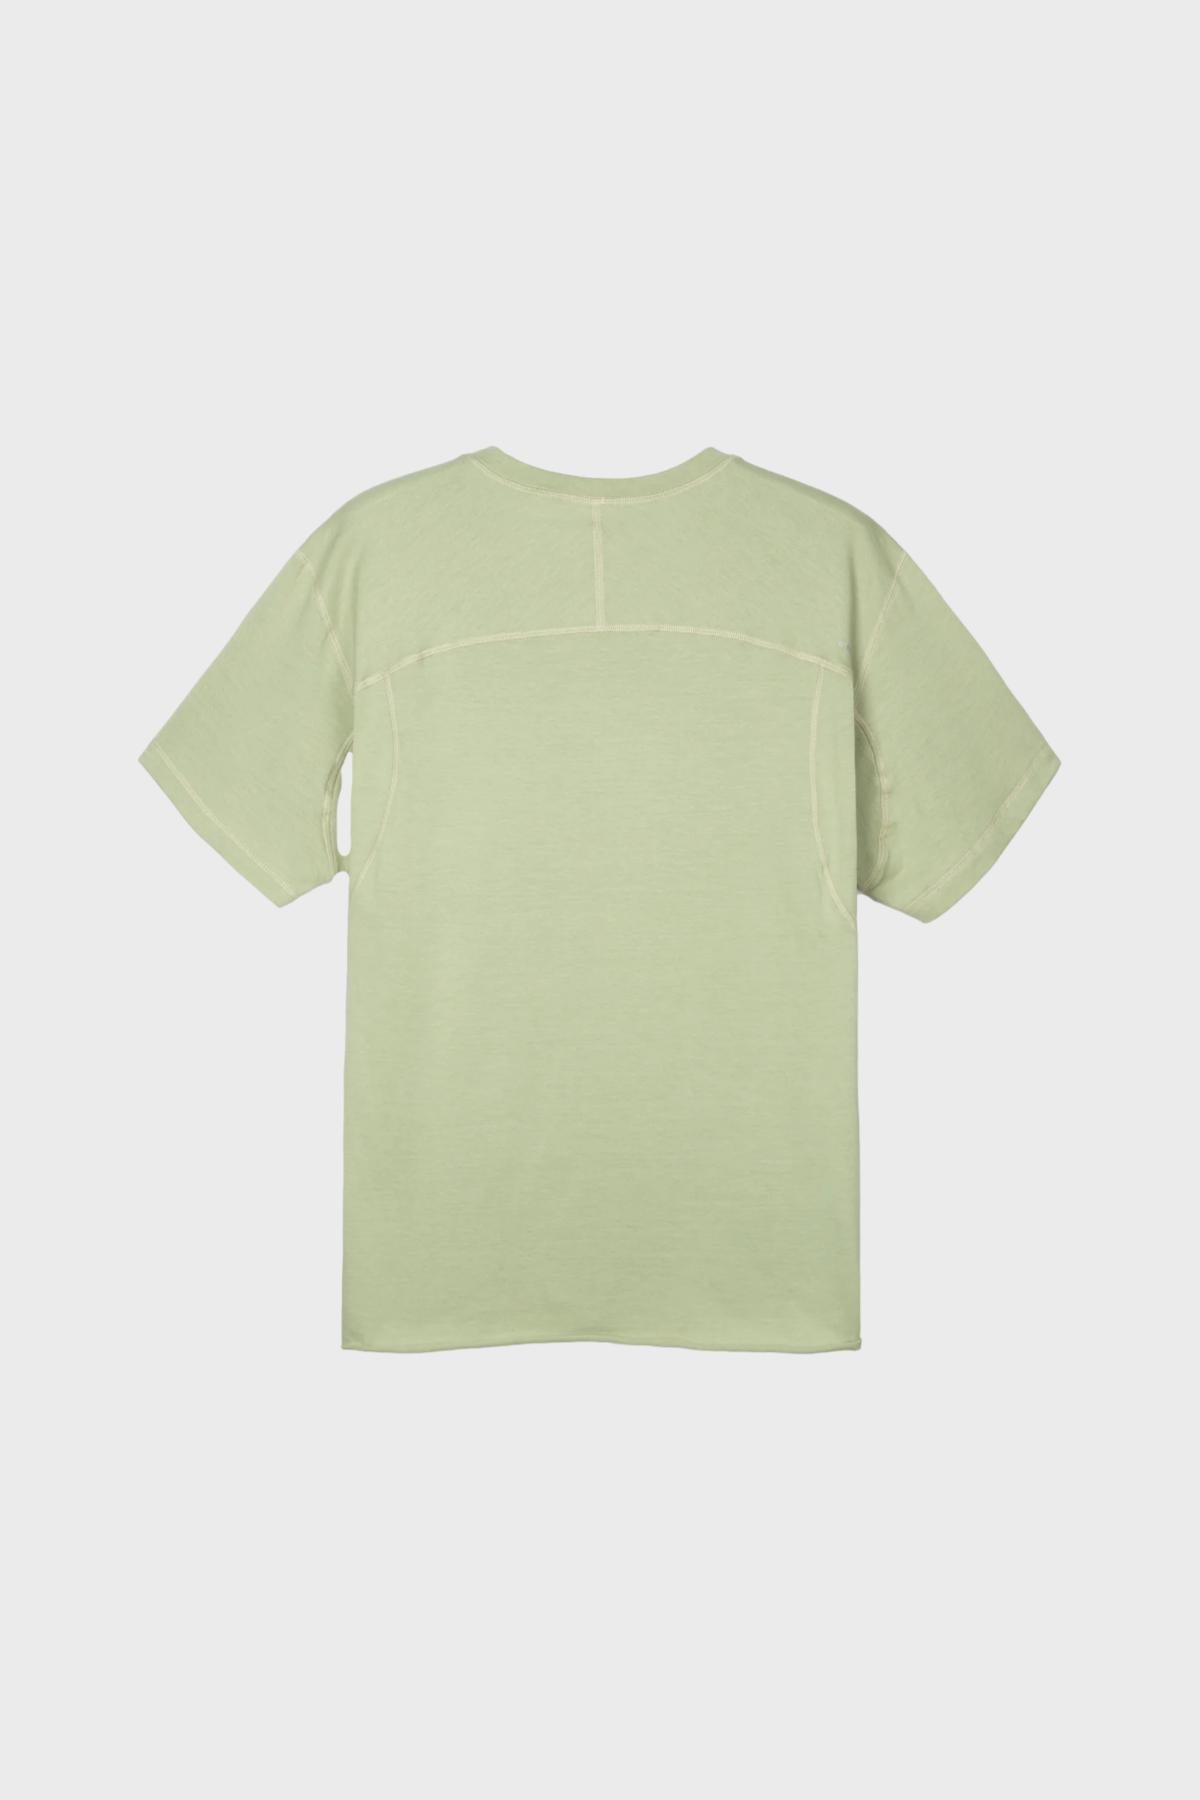 SATISFY - SOFTCELL CORDURA CLIMATE T-SHIRT